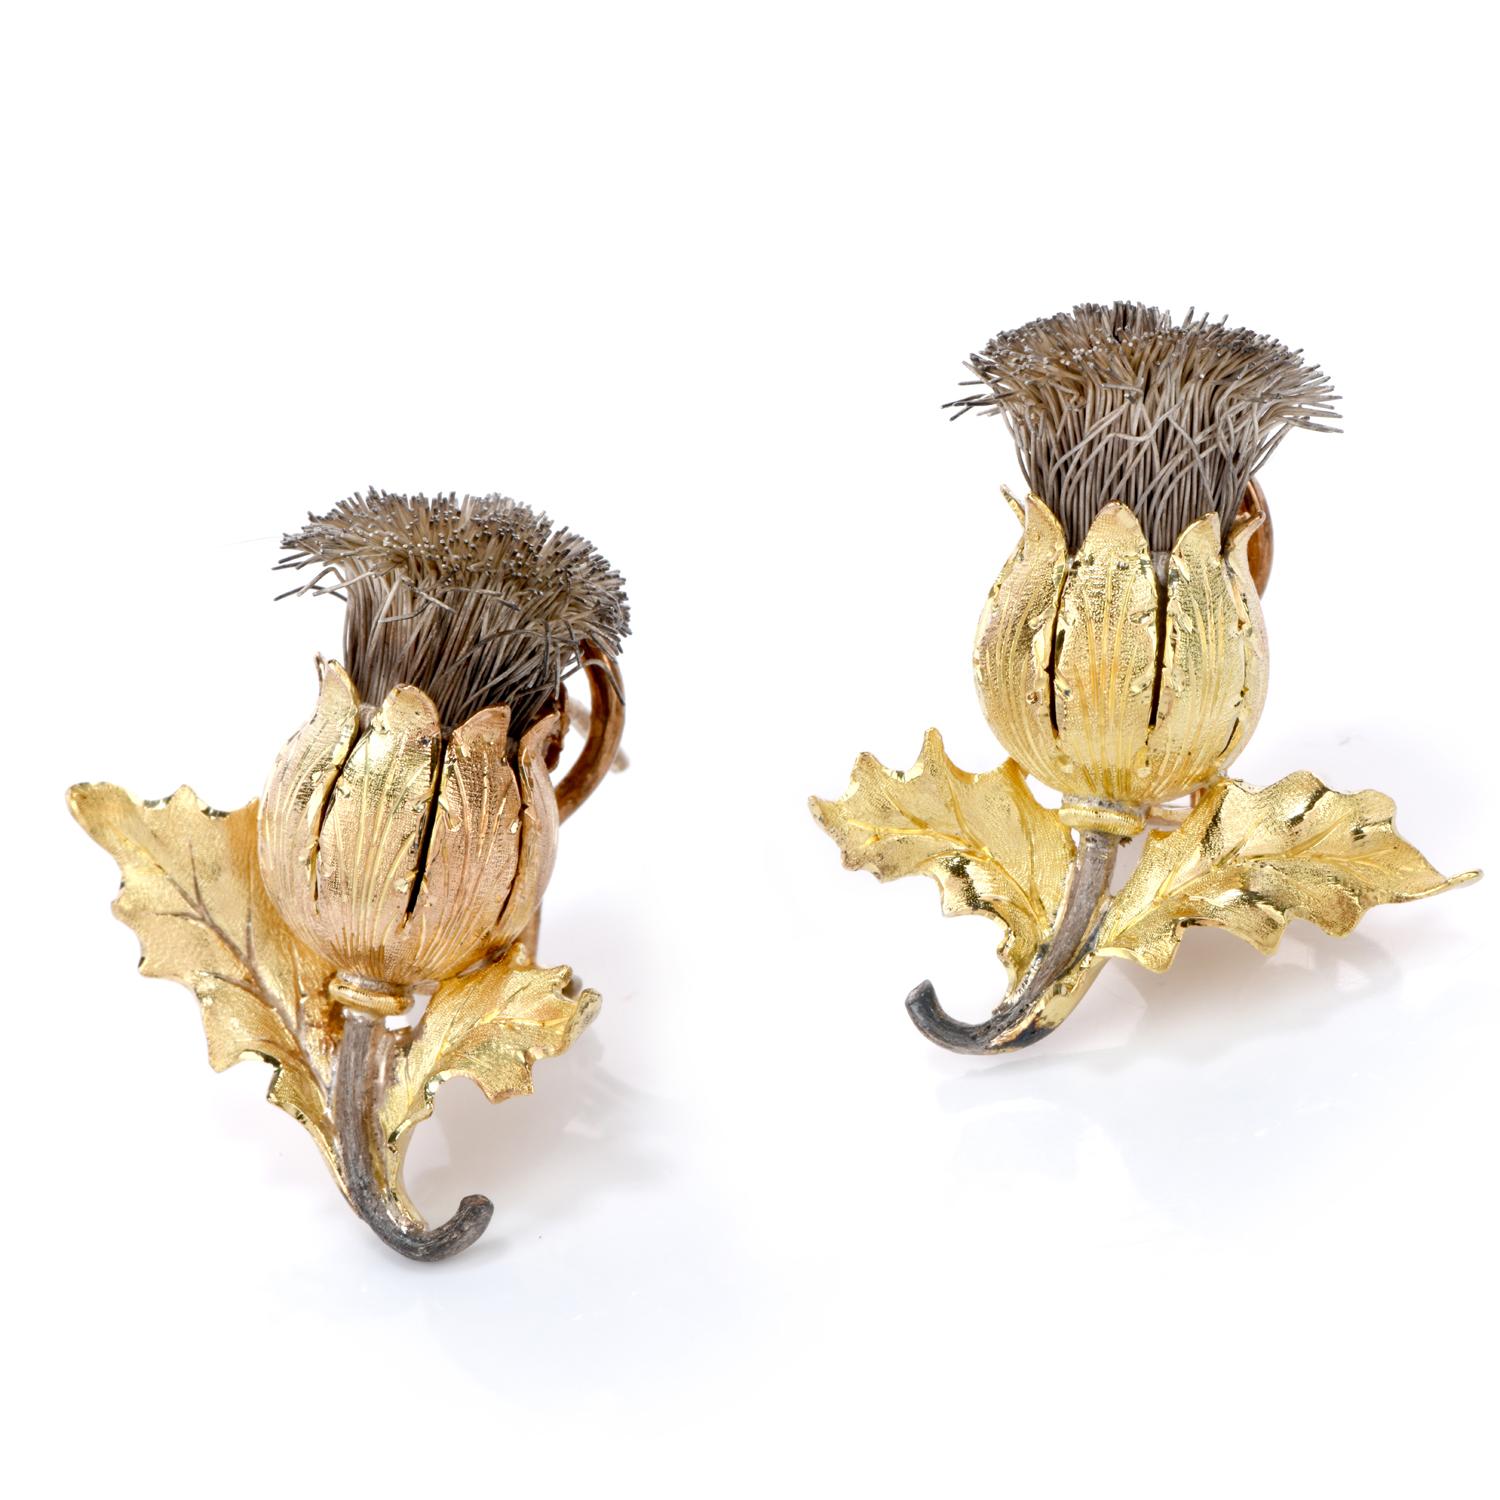 Explore your artistic side with these prominent Buccellati Vintage 18K Yellow Gold and Silver Tulipa Flower Thistle gold Earrings by Buccellati!  The top portion of the flowers display a silver fray style and are in very good condition.  The base of